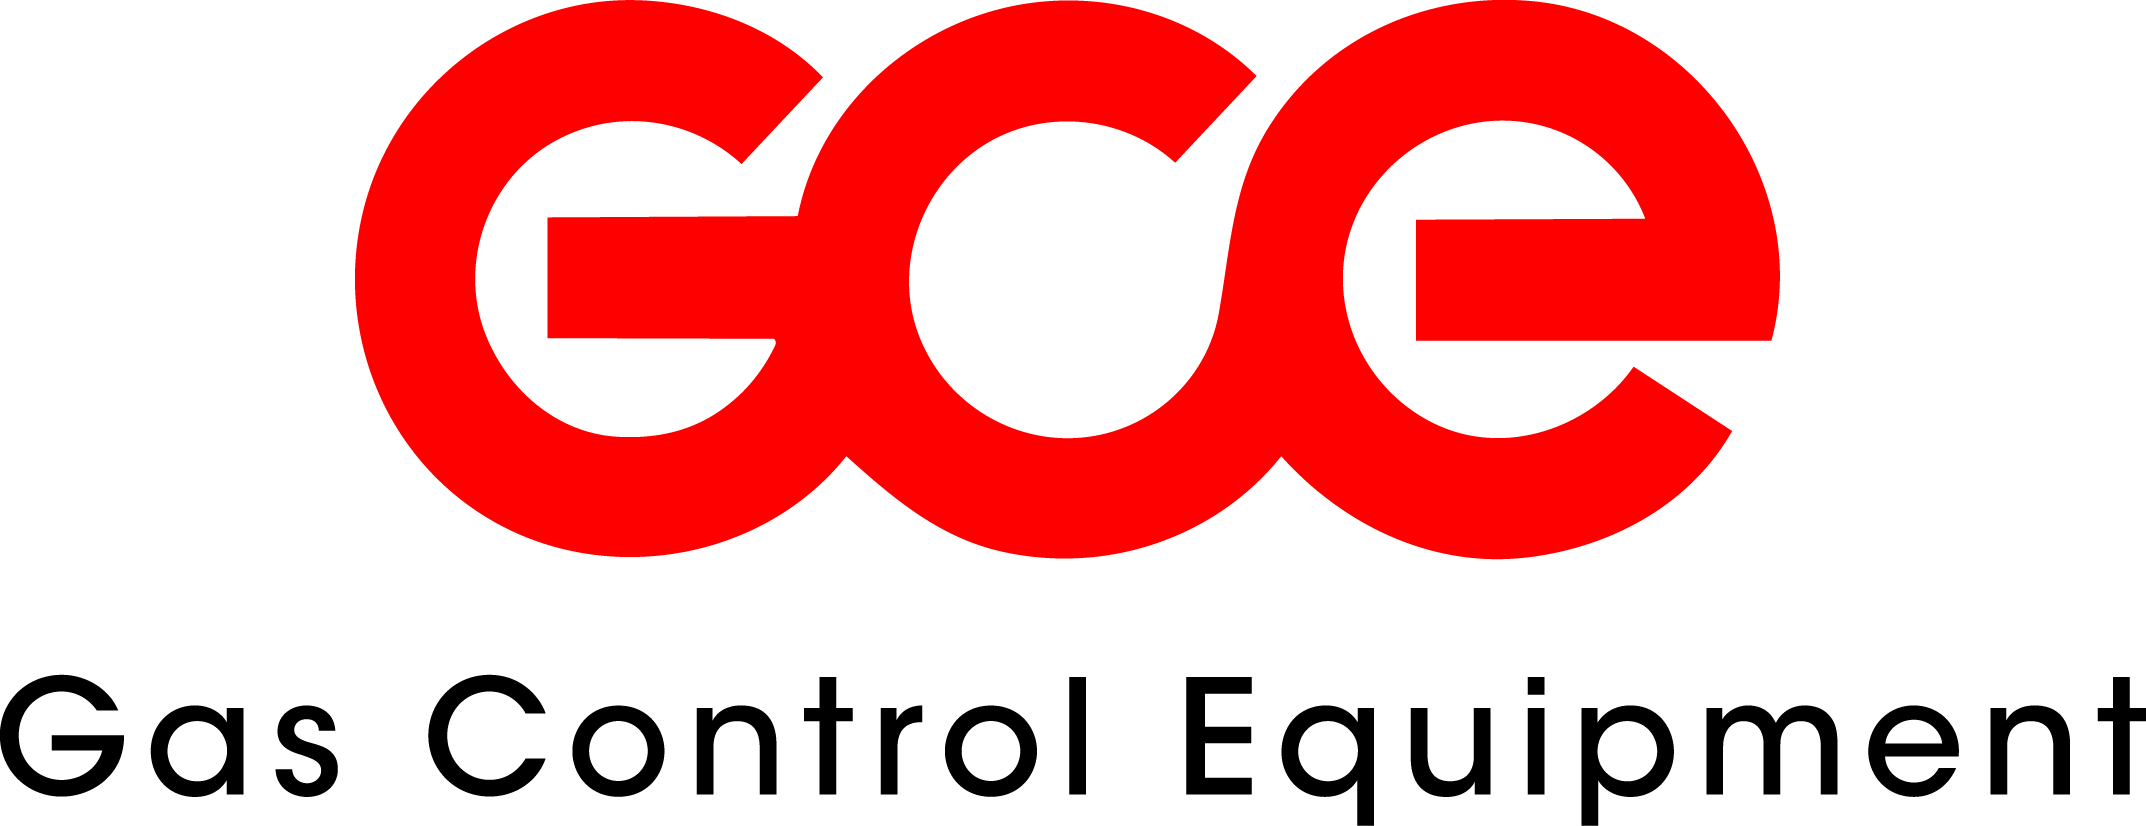 gce colombia